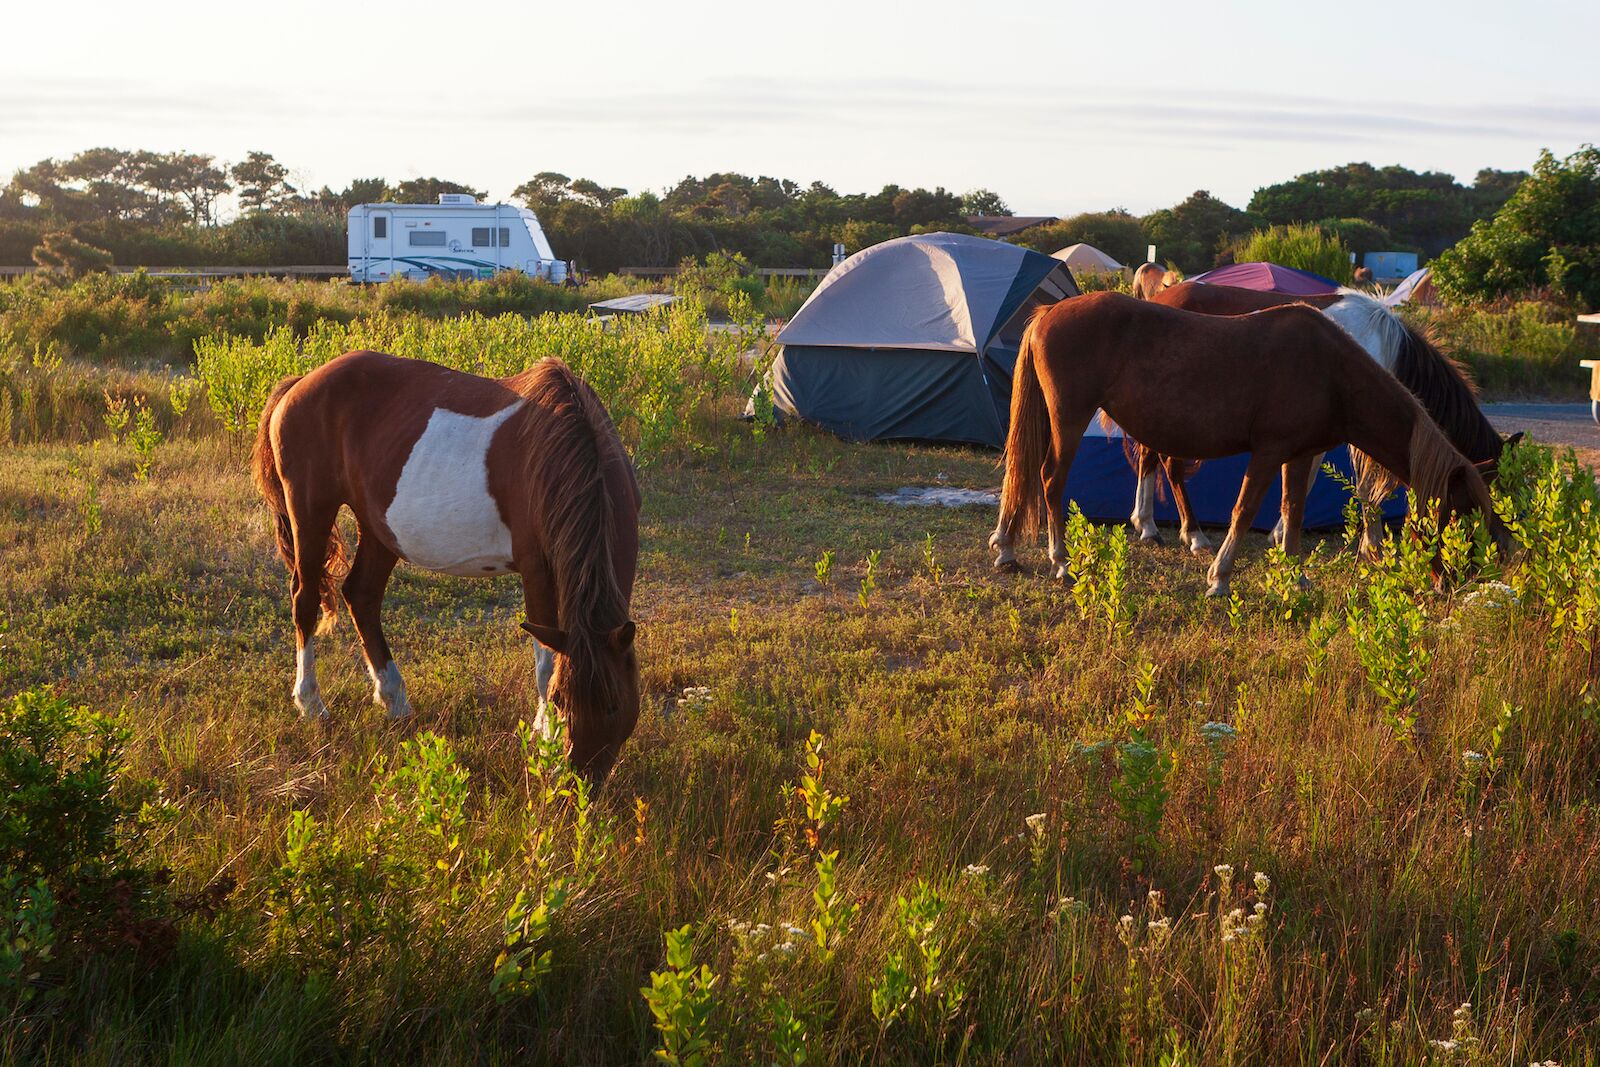 Assateague Island, Maryland, USA - September 01, 2008 Camping on Assateague Island, made famous by its wild horses, can be romantic, or a nightmare if you leave your food unsecured.